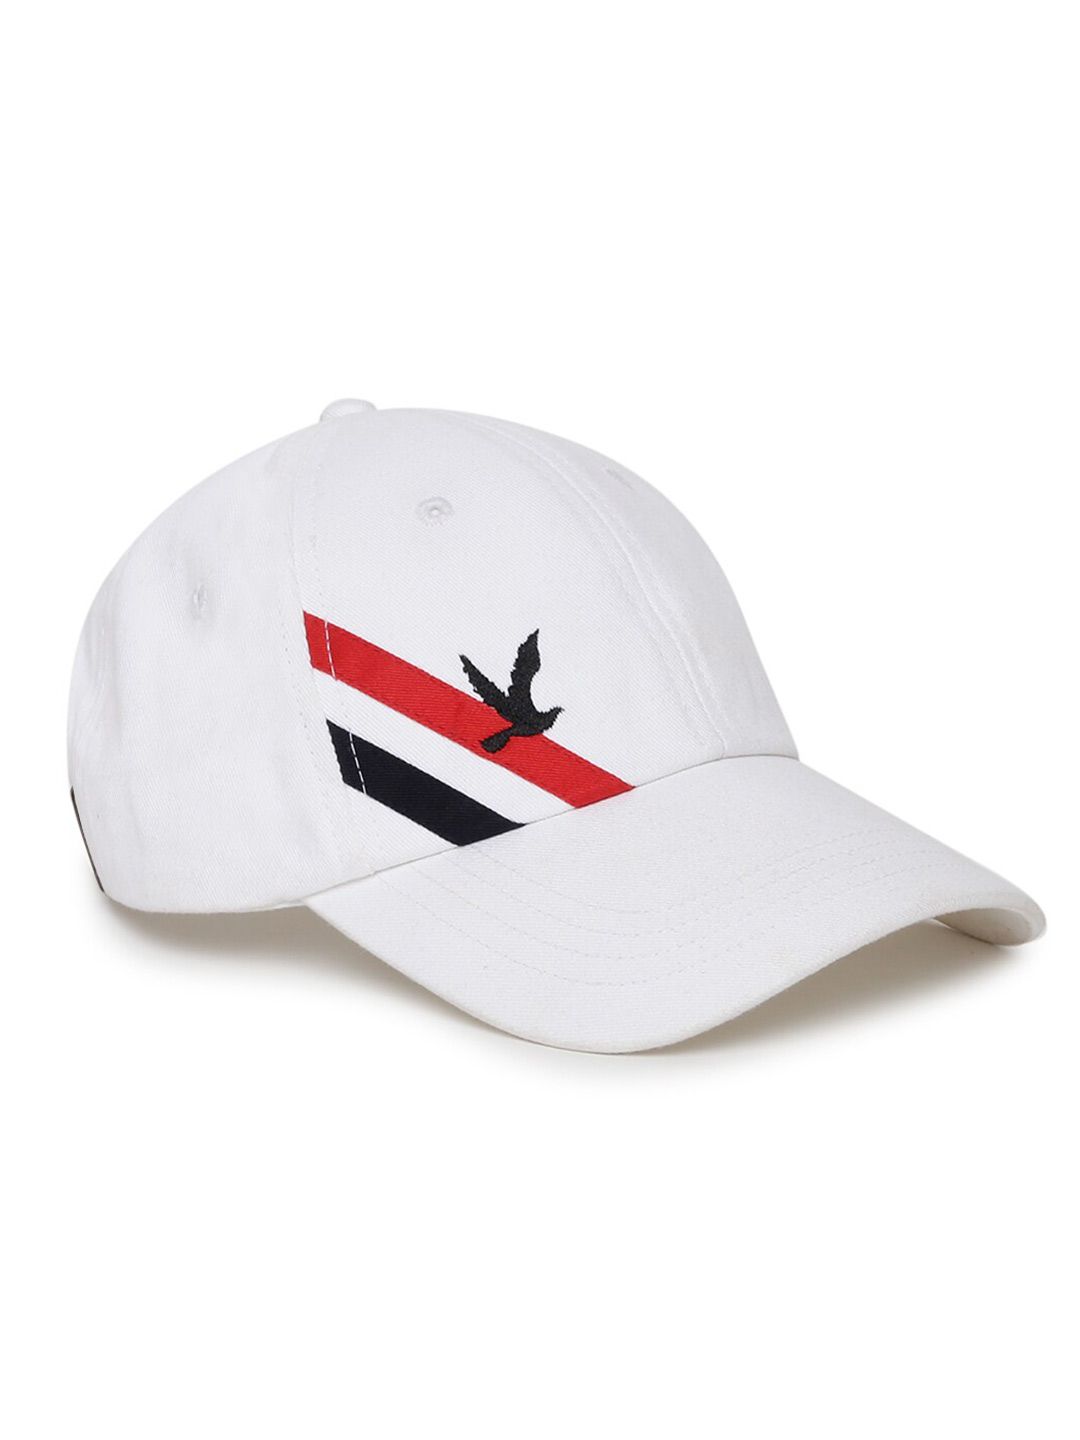 MR BUTTON Unisex White & Red Printed Cotton Baseball Cap Price in India